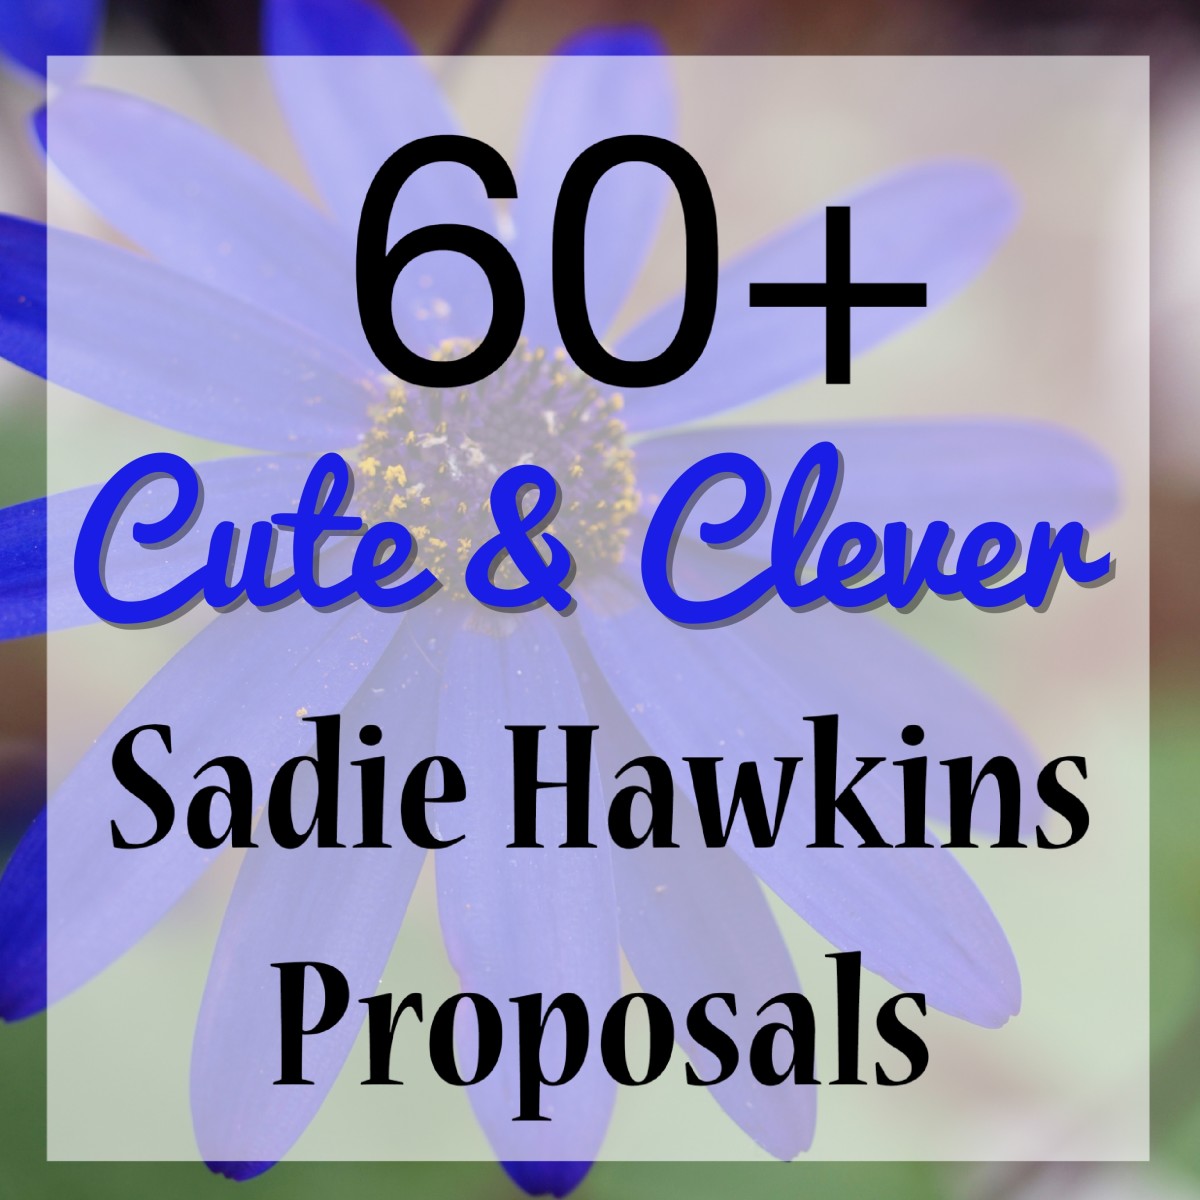 Need ideas on how to ask your crush to the Sadie Hawkins dance?  Here are over 60 to choose from.